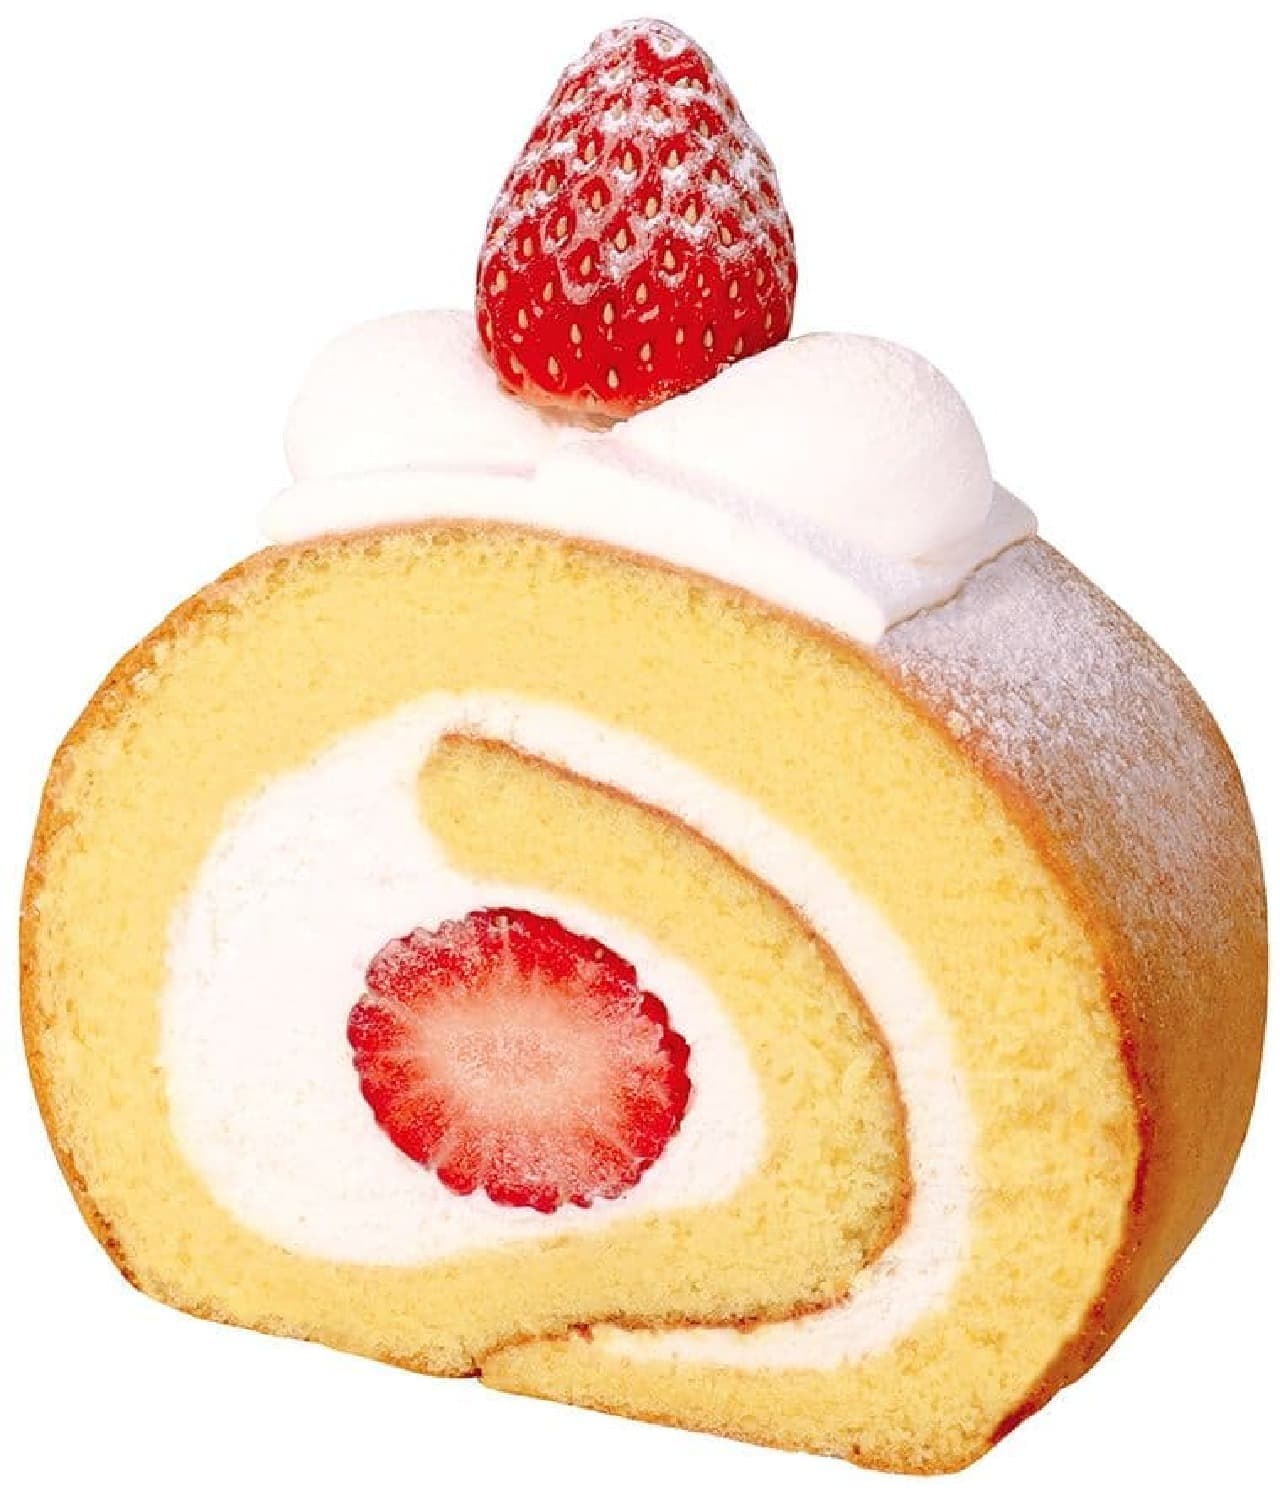 Fujiya pastry shop "Domestic strawberry and honey rice flour fluffy roll"